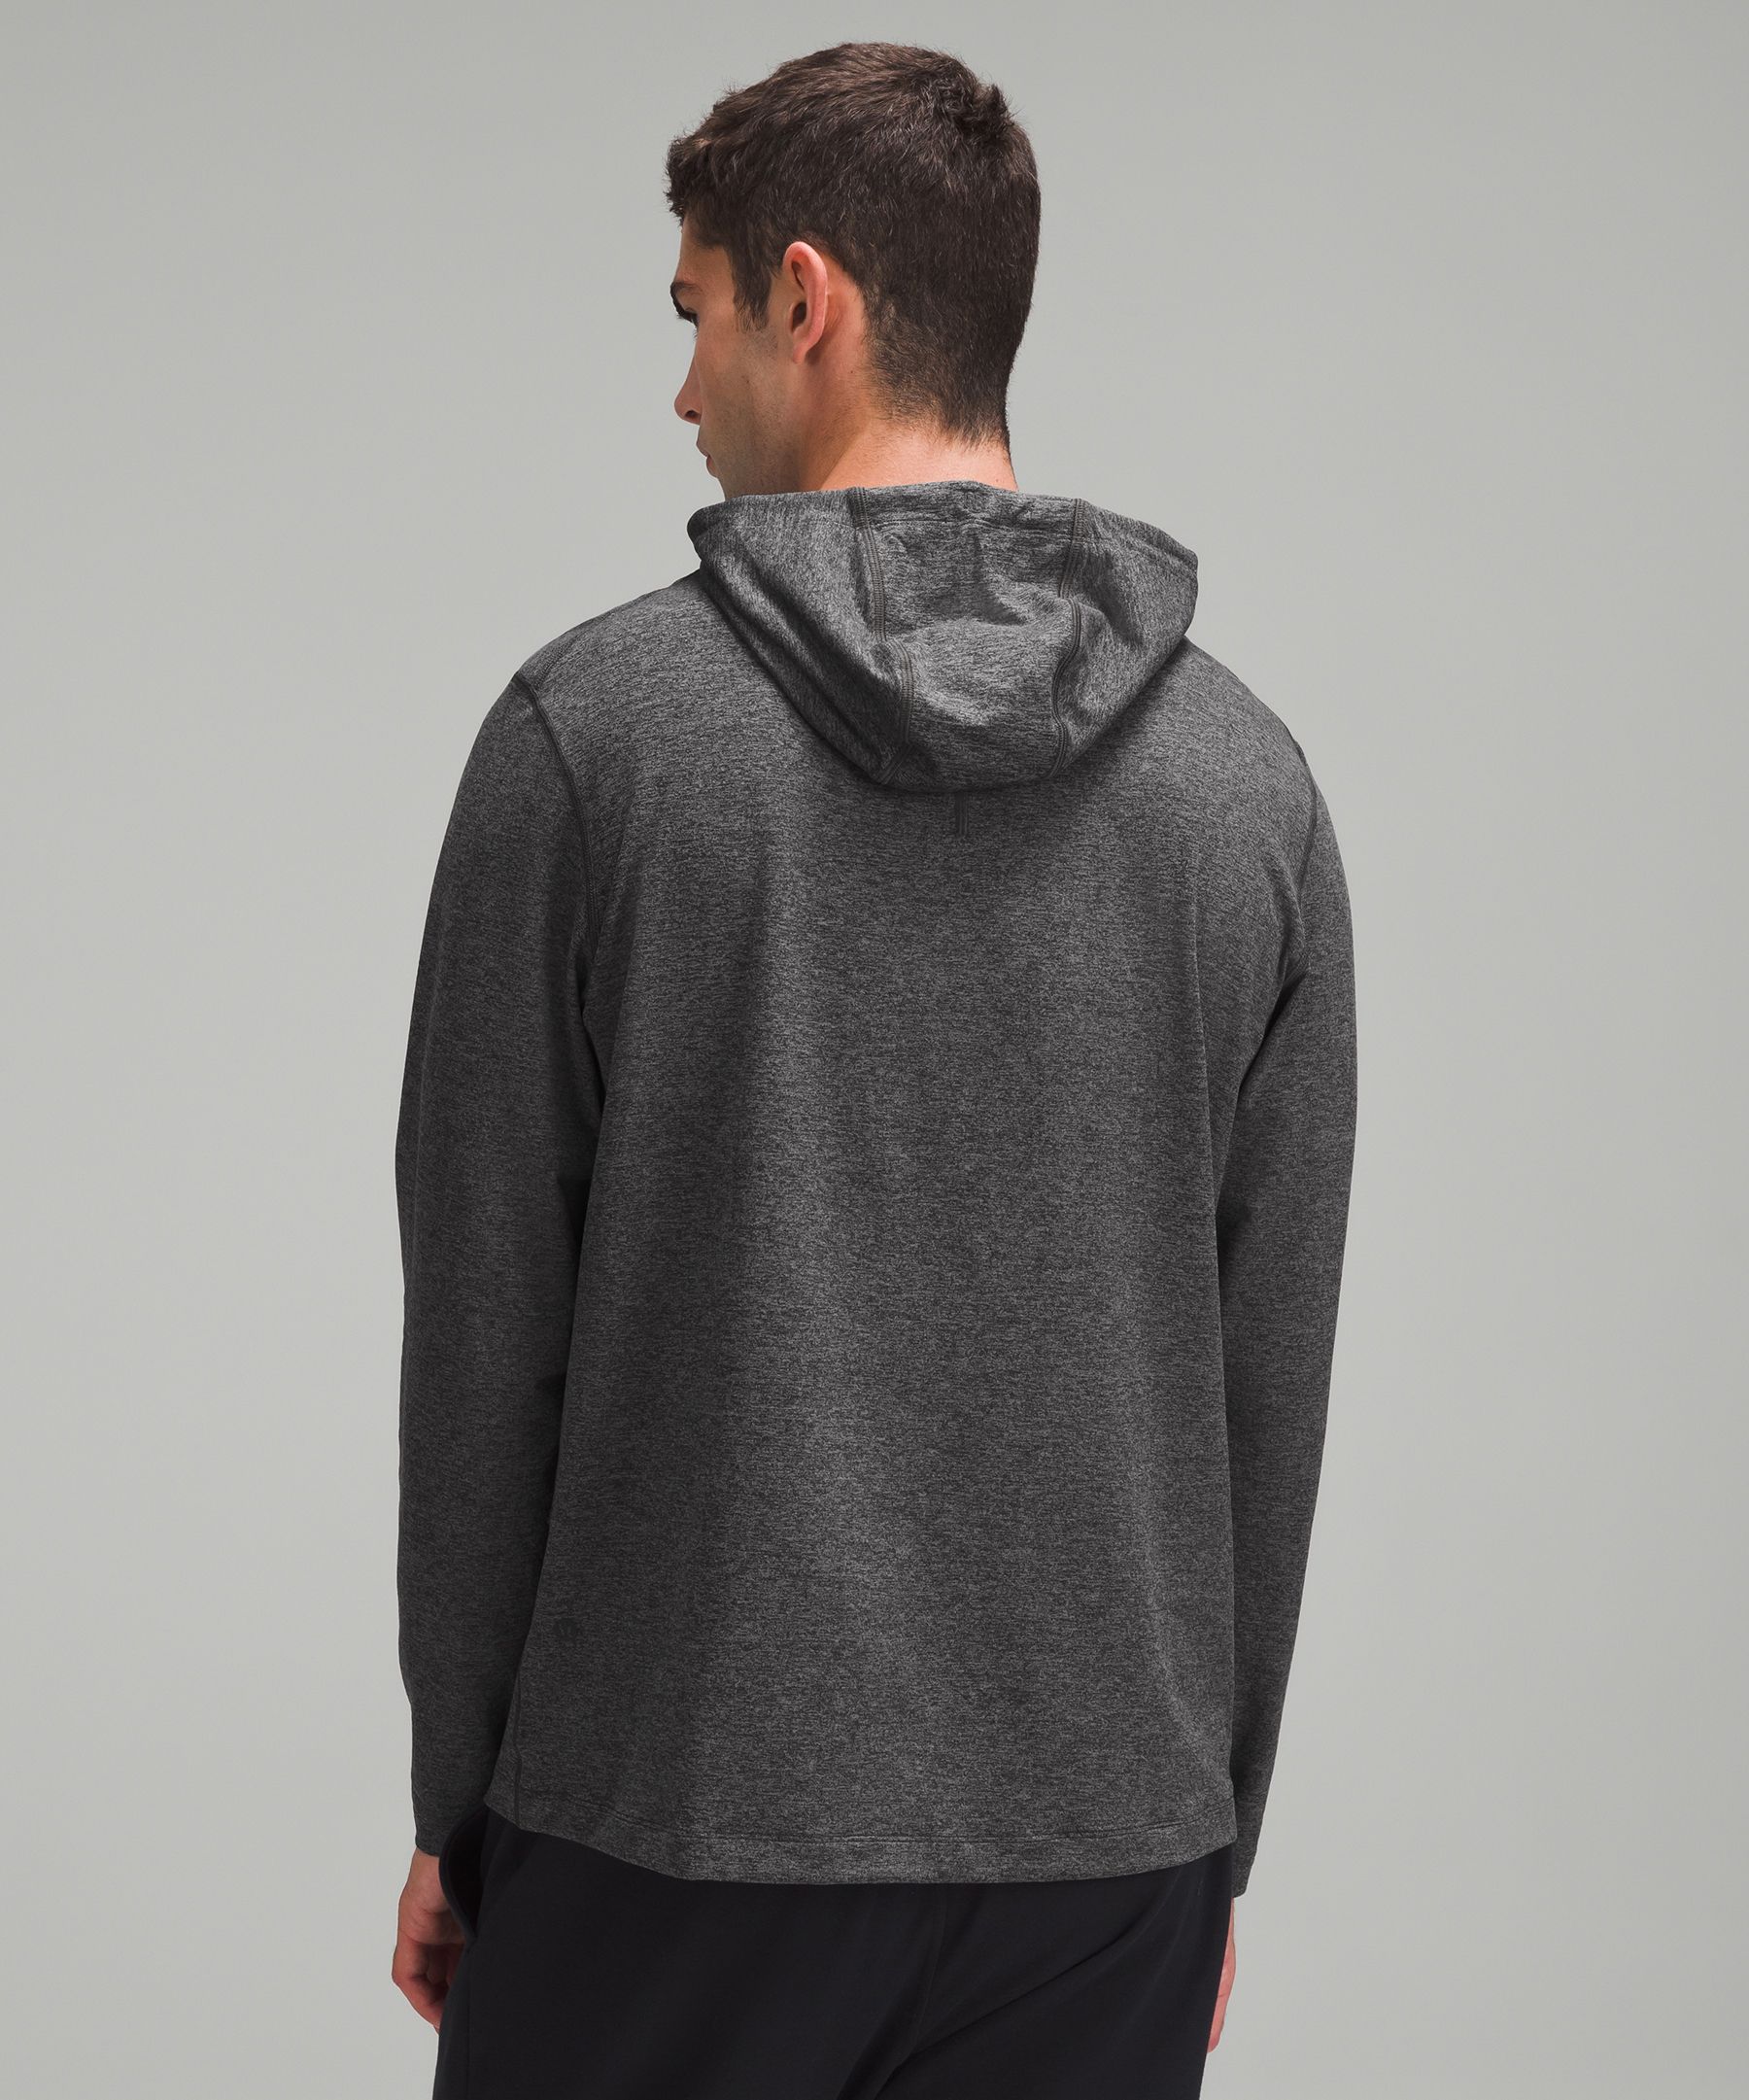 Soft Jersey Pullover Hoodie, Men's Long Sleeve Shirts